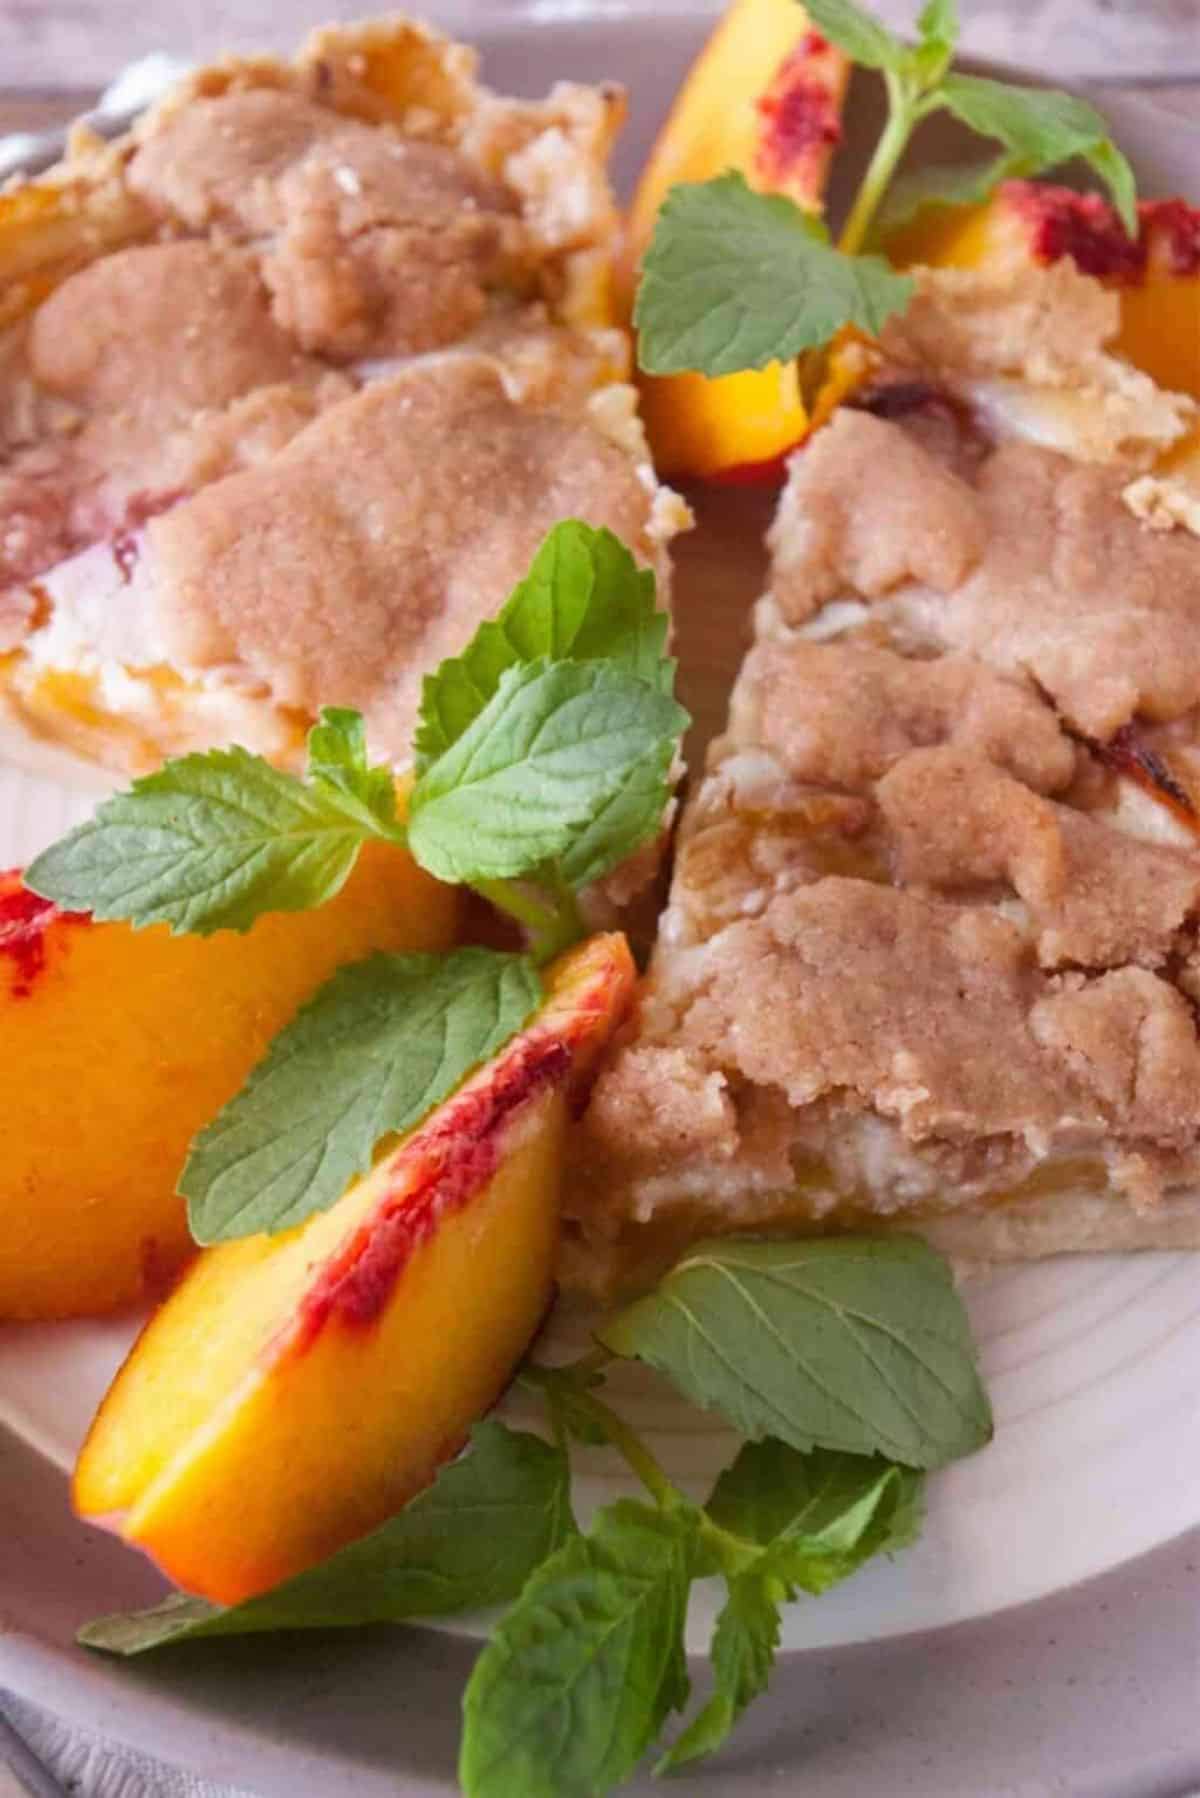 Two pieces of delicious Streusel Crumb Topped Peach Pie on a plate.